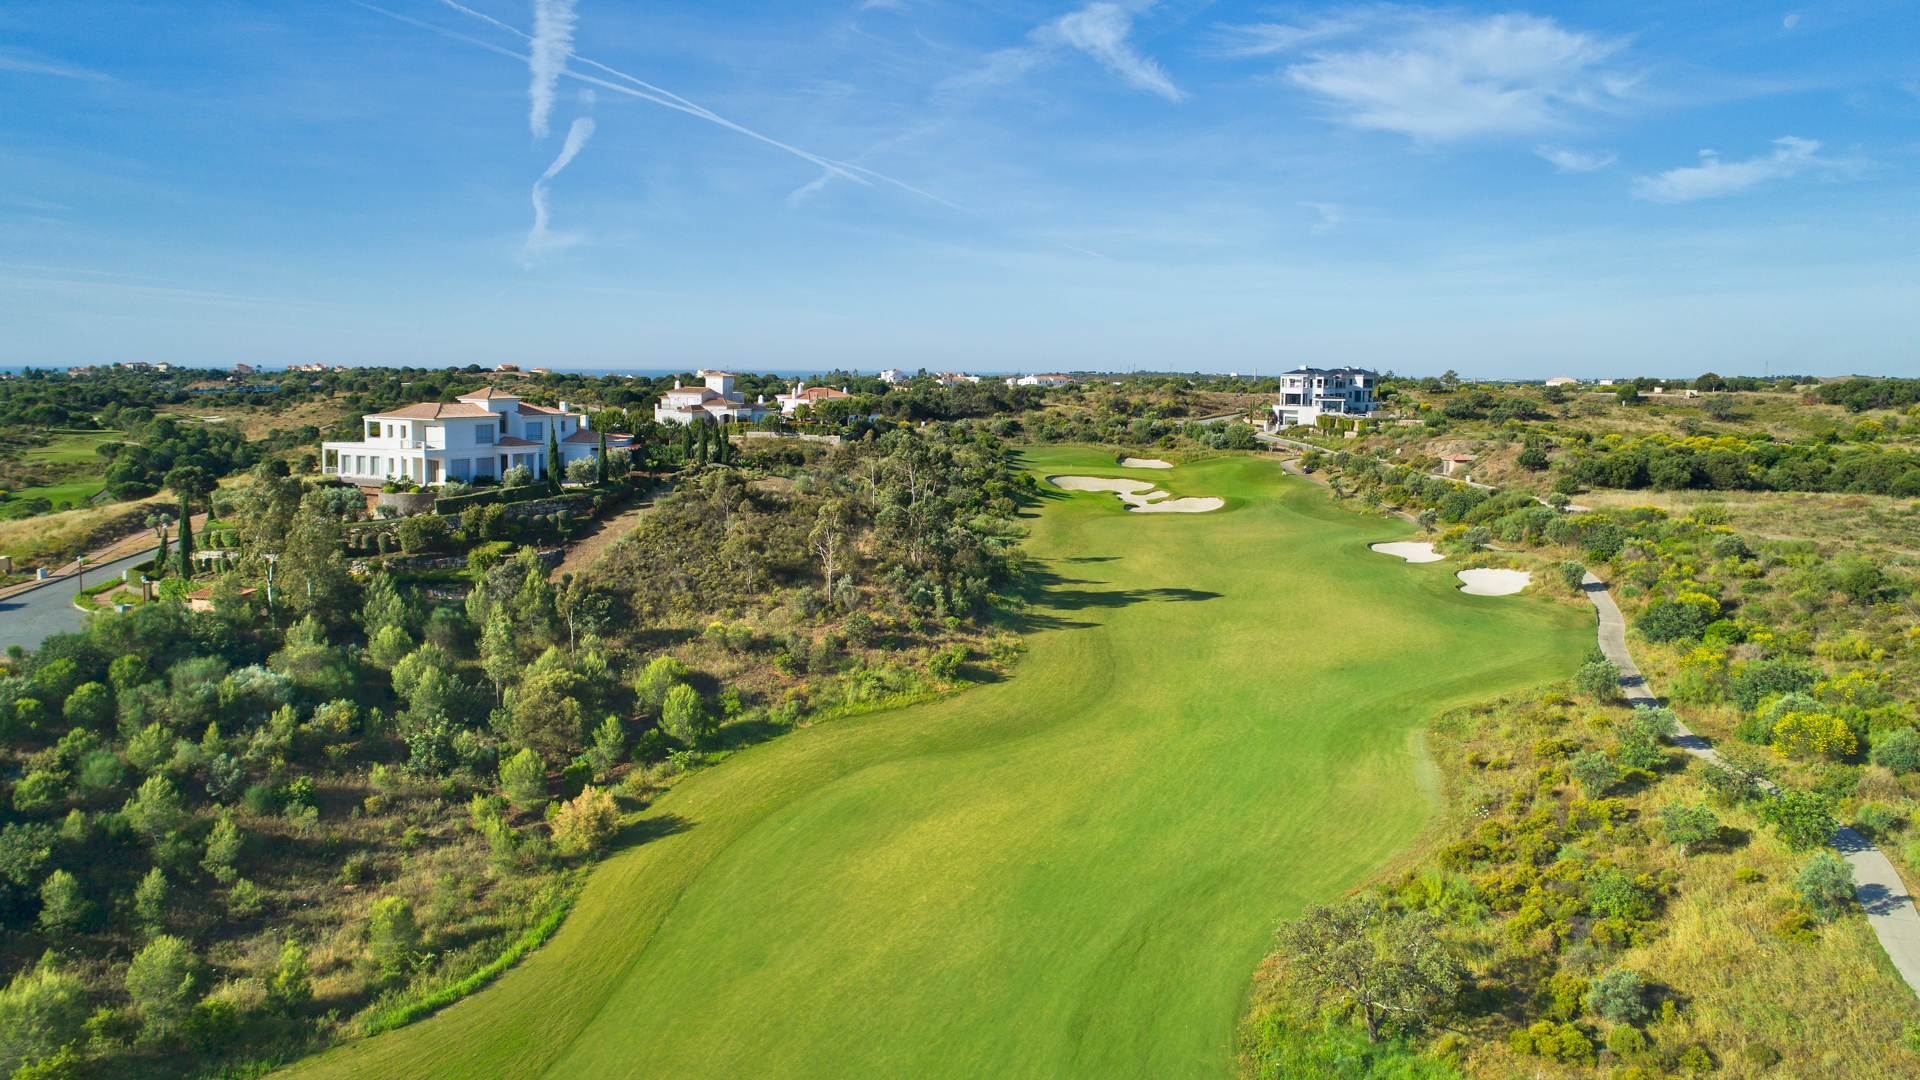 Selection of Plots on One of the Finest Golf courses in Europe, in the Eastern Algarve | TV1588 Great plots available on the number 1 Golf resort in Portugal, with magnificent views and gated security, on Monte Rei Golf Course, in the Eastern Algarve.